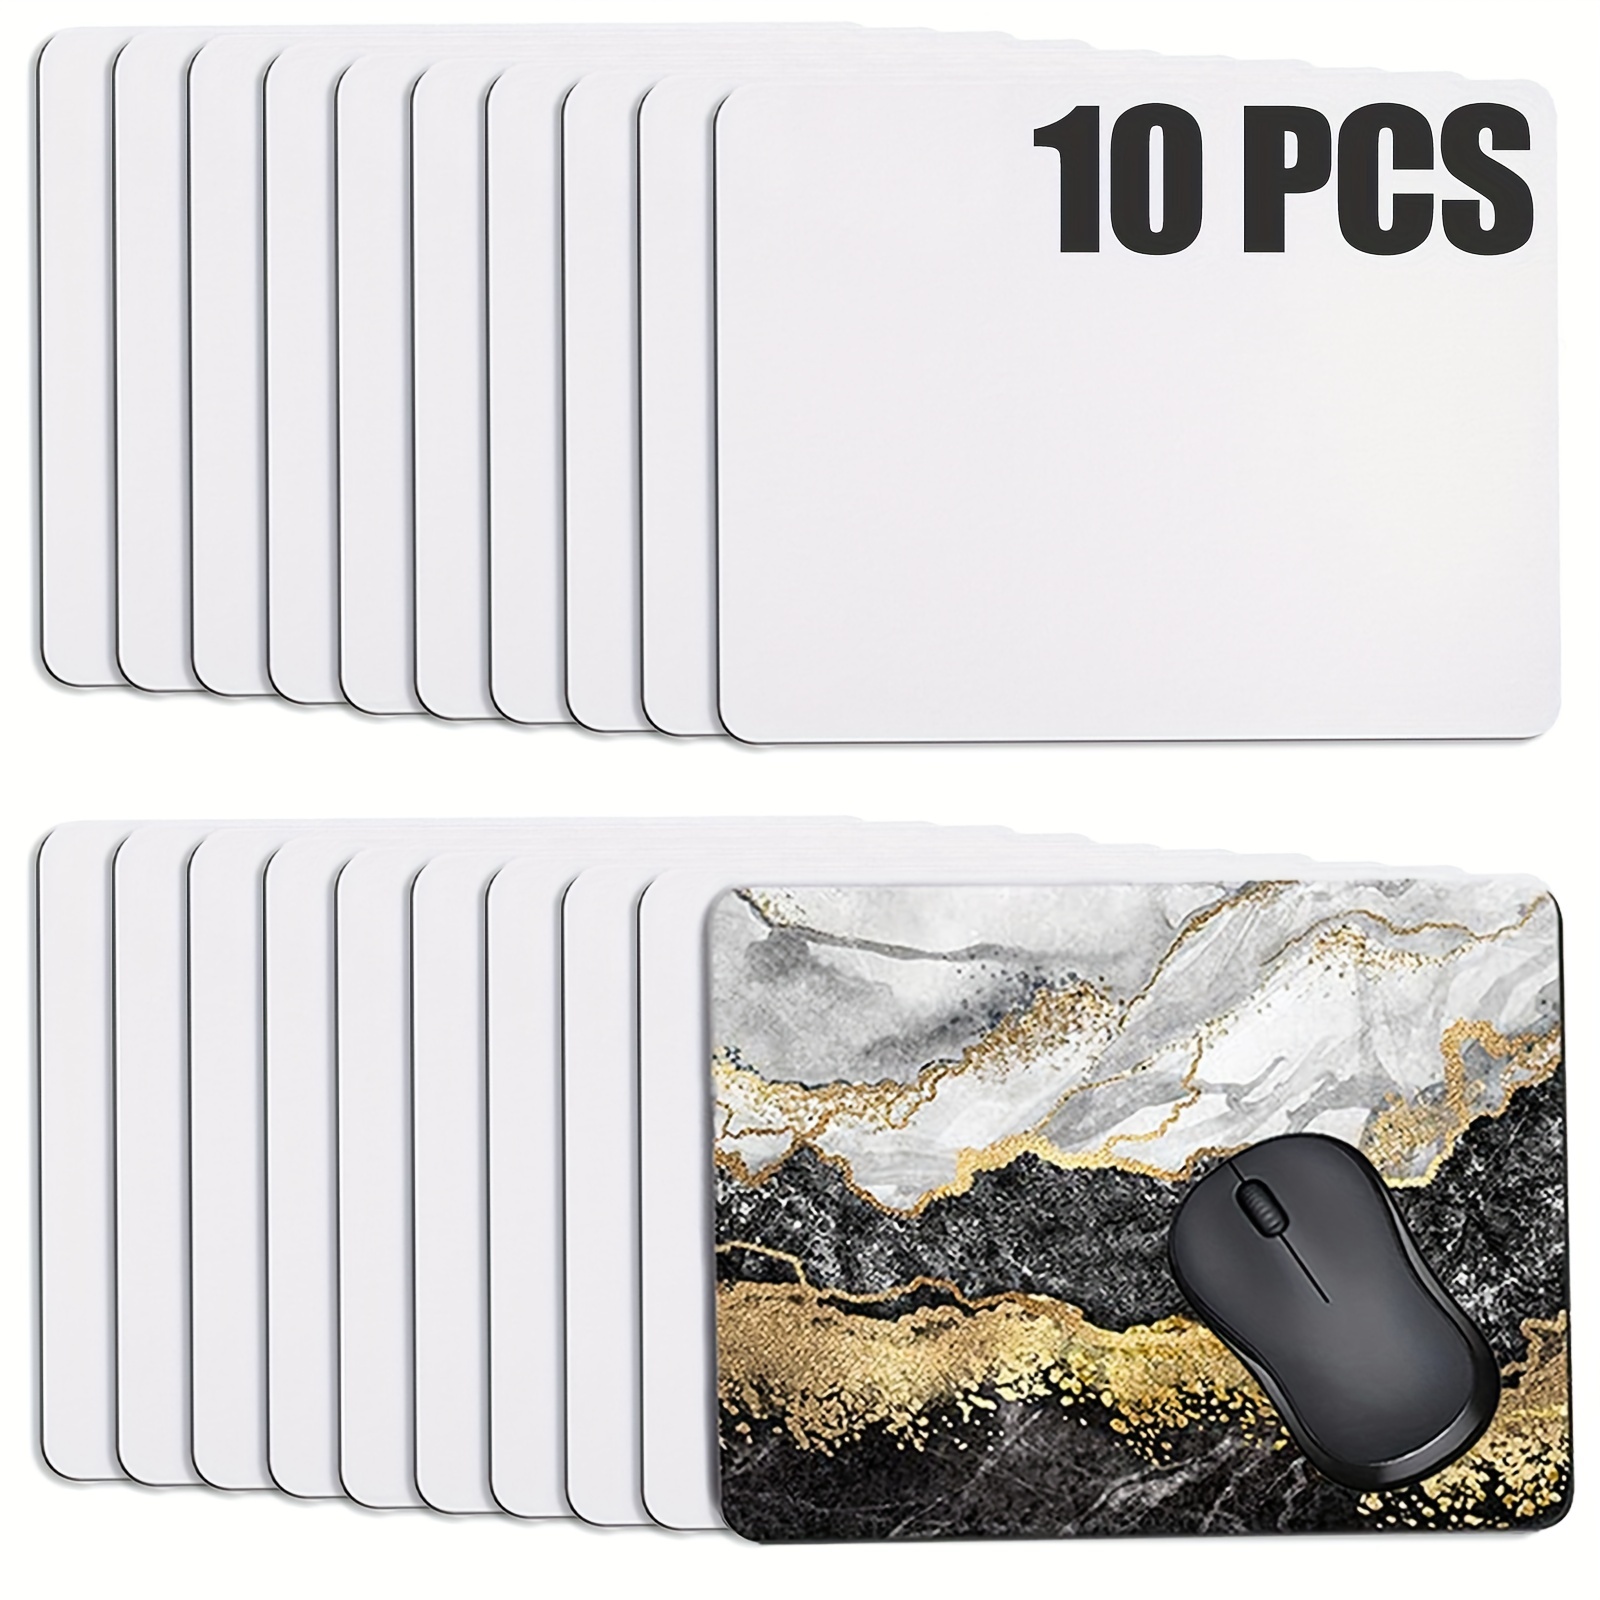 

10pcs Sublimation Blank Mouse Pad For Thermal Sublimation Transfer Sublimation Blank Mouse Pad Non-slip Bottom 9.8x7.8in